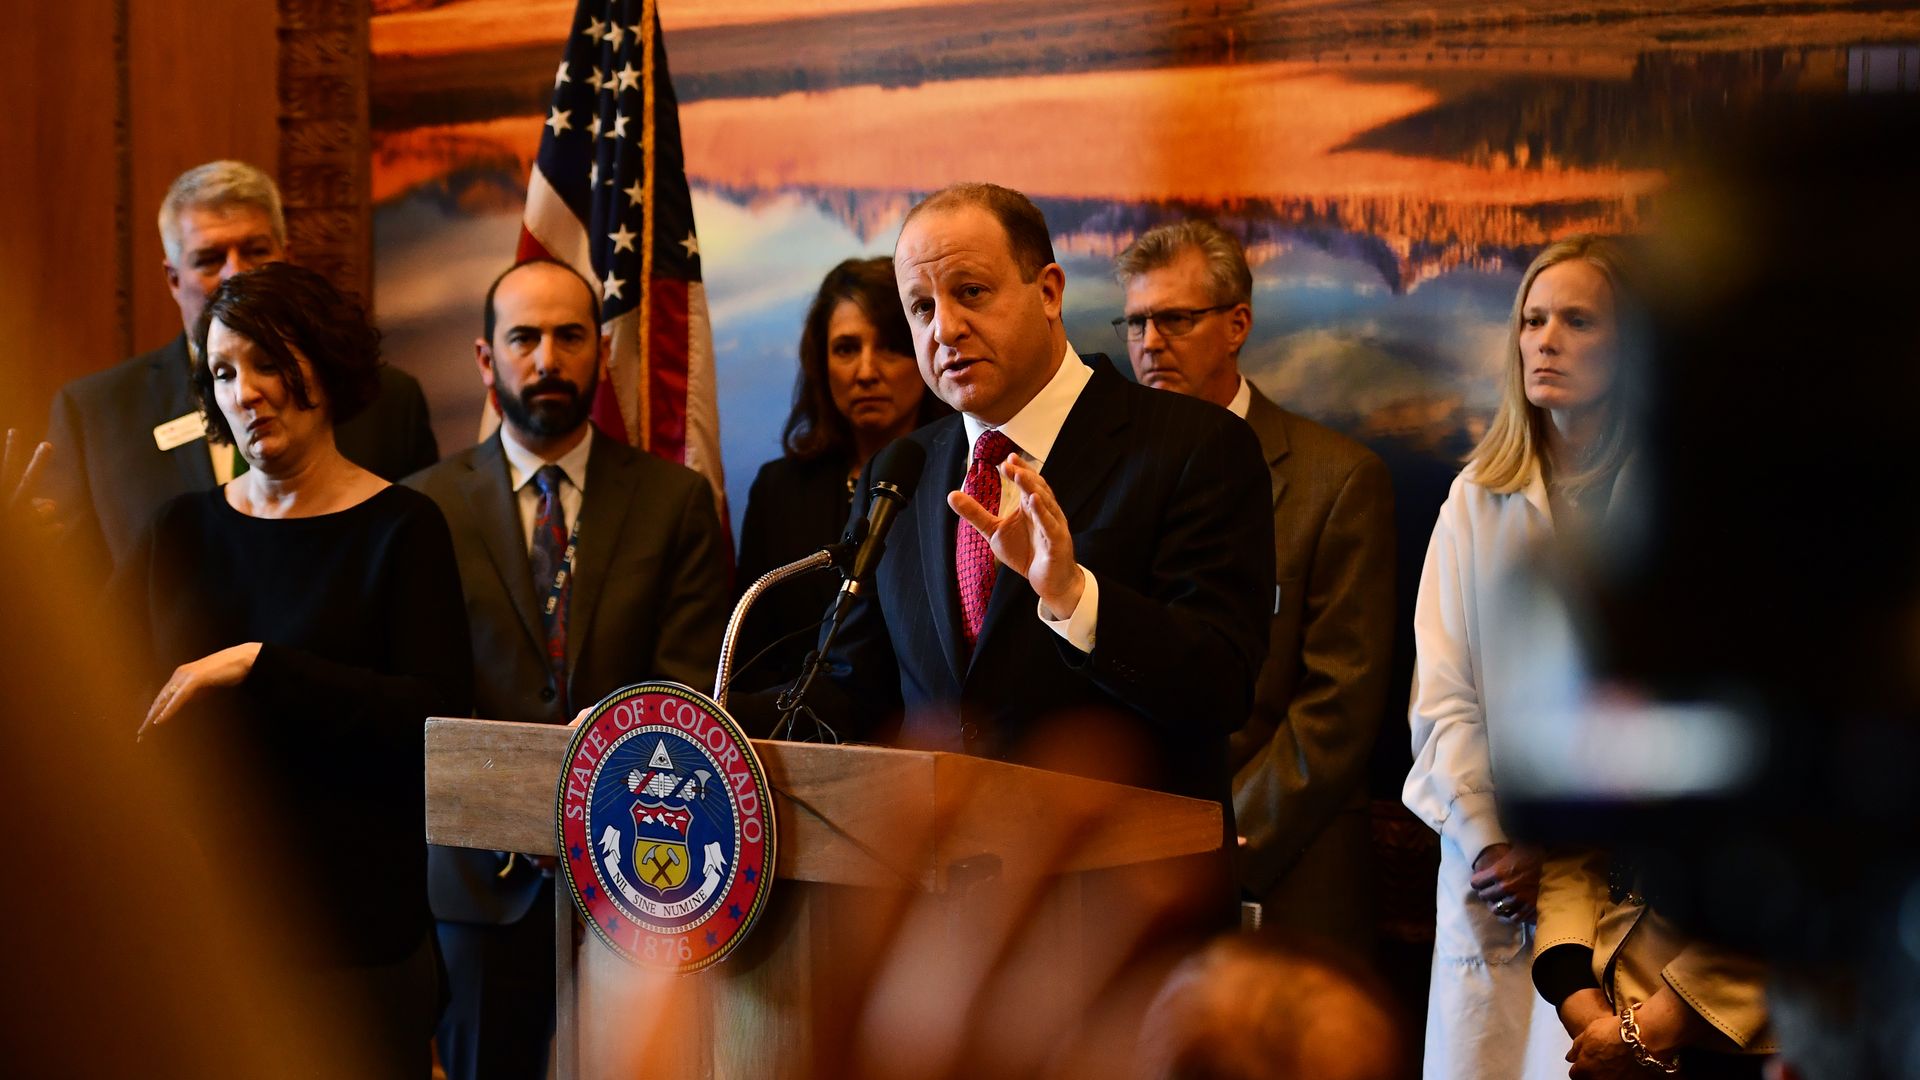 Mike Willis stands over Gov. Jared Polis' left shoulder as the governor announces a state of emergency in March 2020 due to COVID-19. Photo: Hyoung Chang/The Denver Post via Getty Images